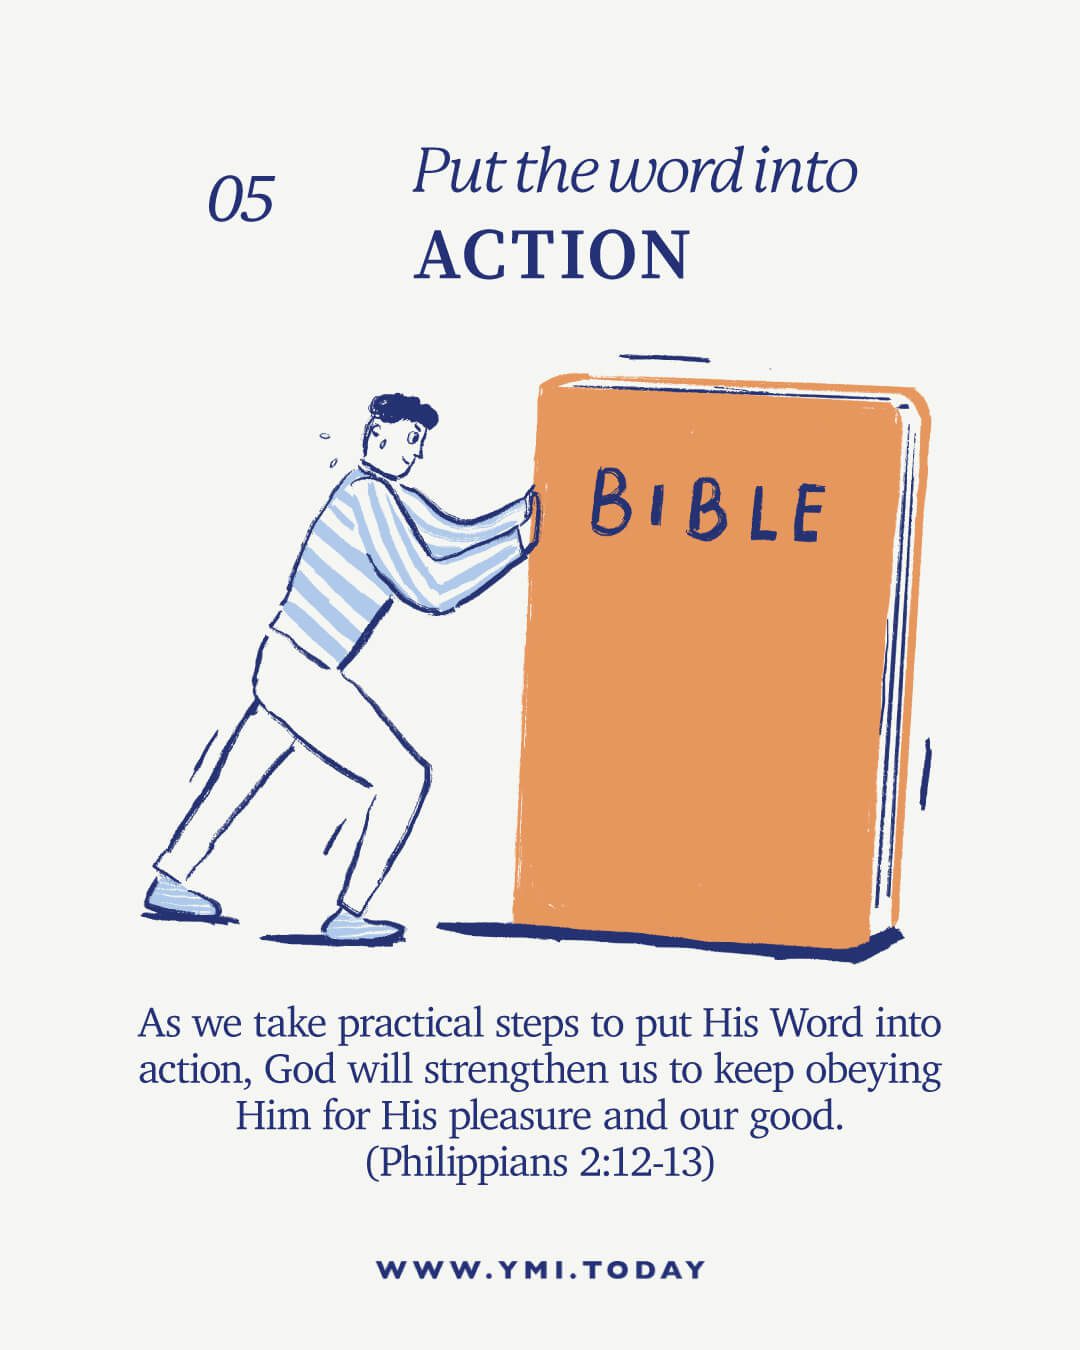 A man is pushing forward the giant bible